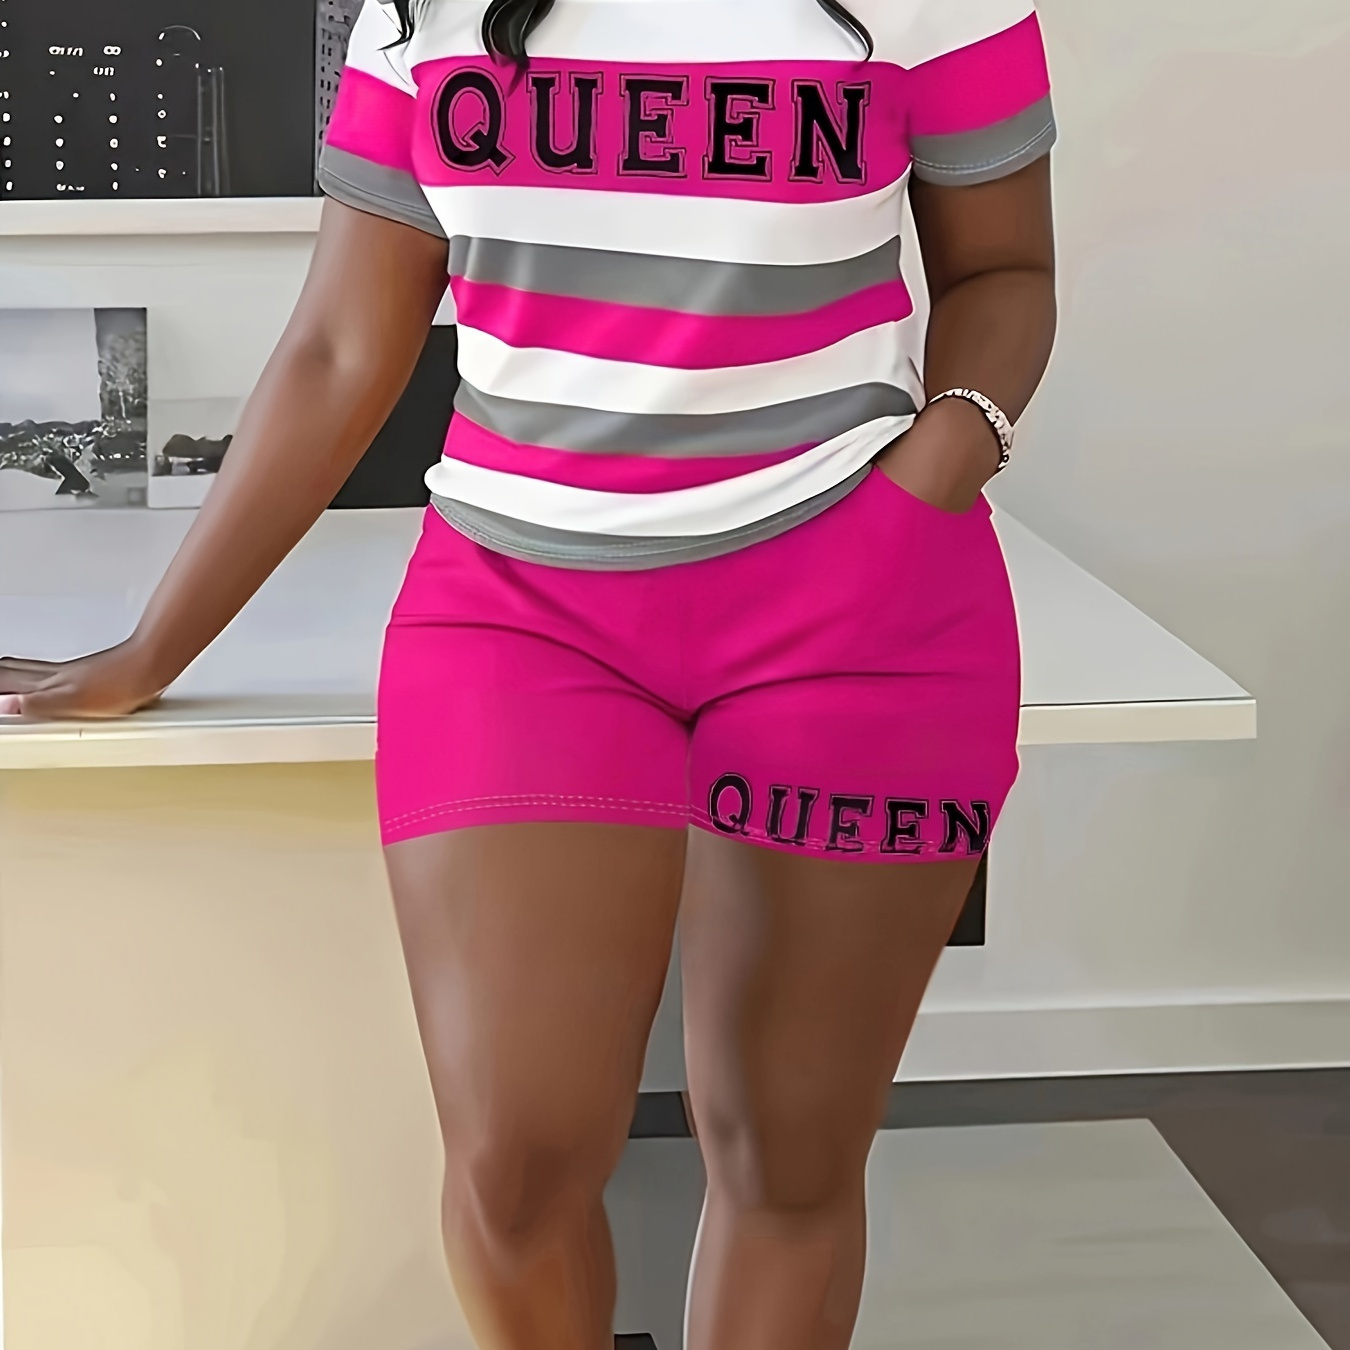 

Queen Print Casual 2 Piece Set, Color Block Crew Neck Short Sleeve T-shirt & Pocket Skinny Shorts Outfits, Women's Clothing